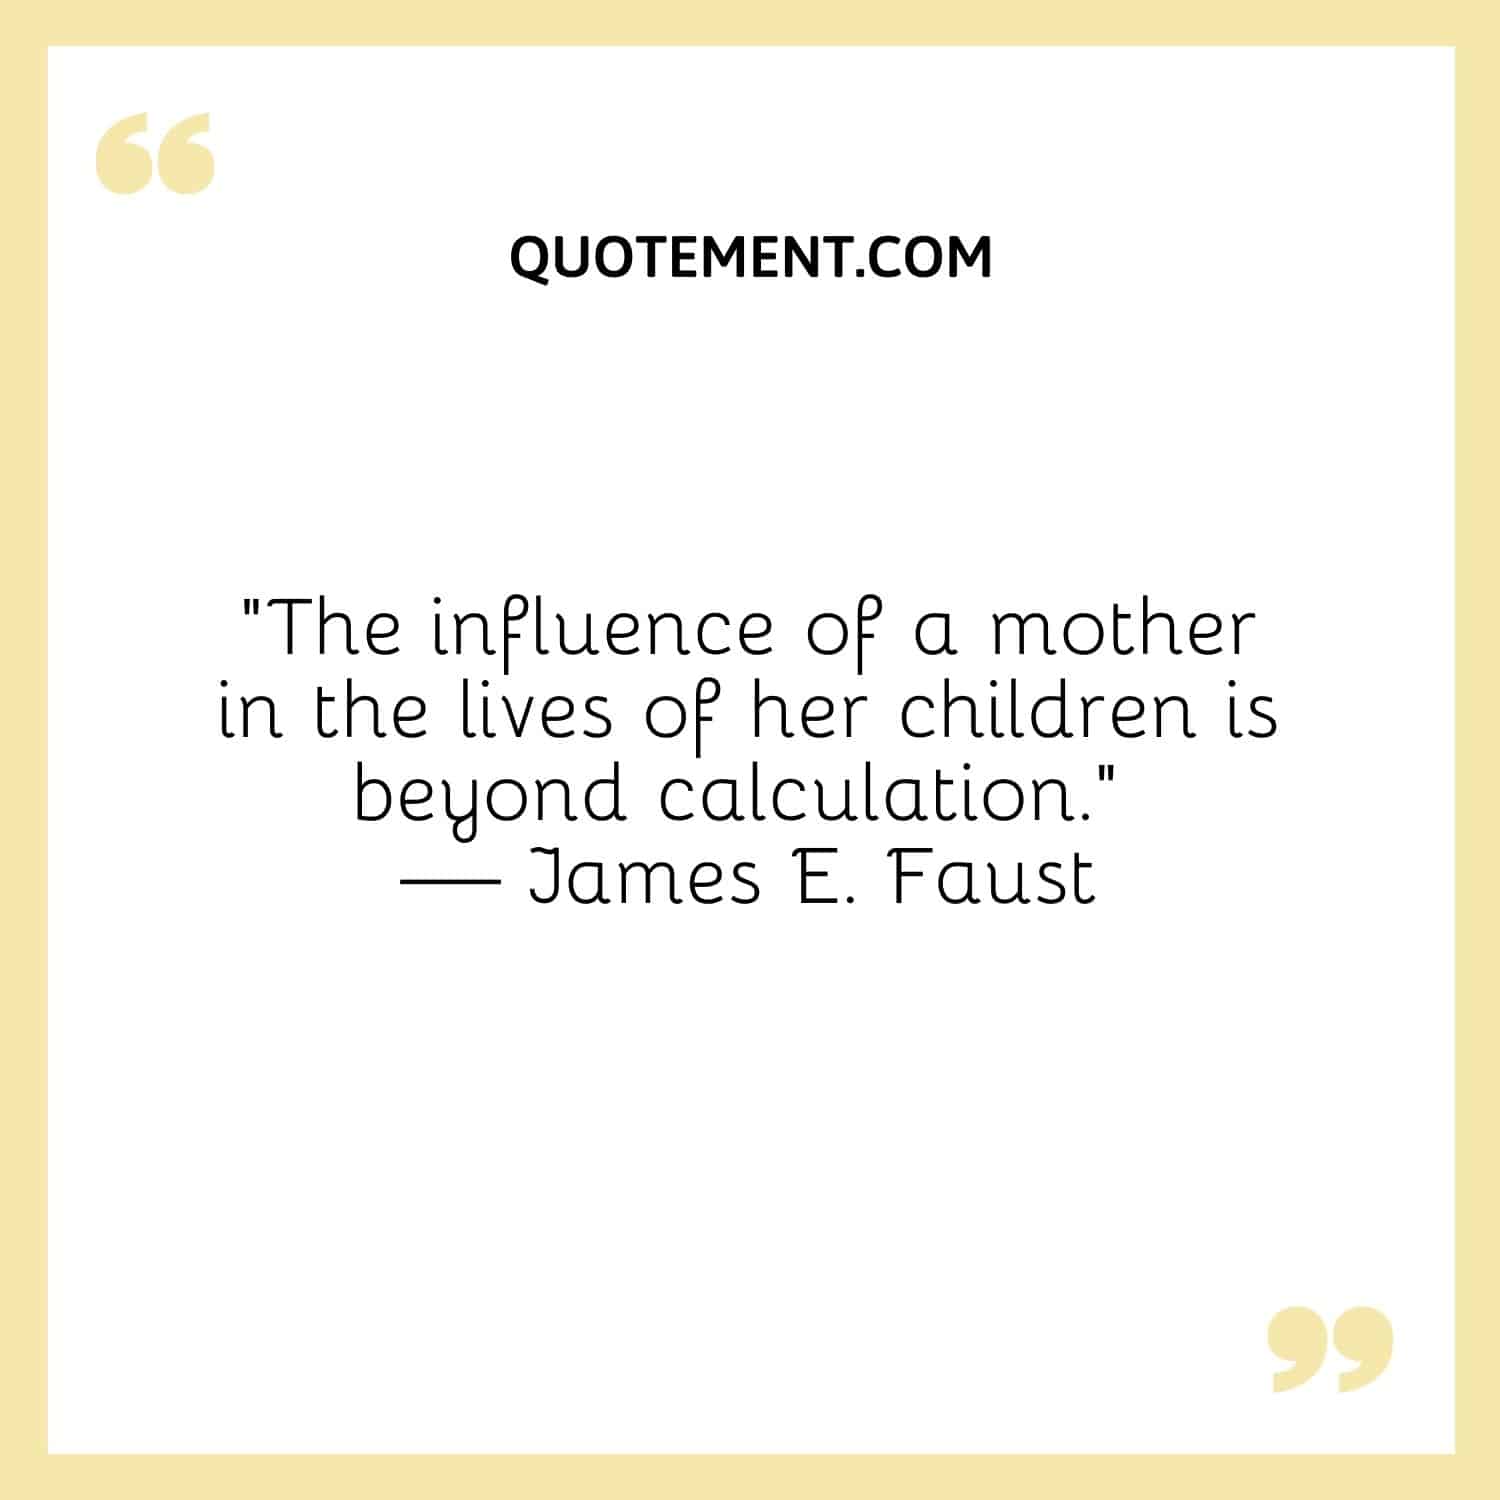 The influence of a mother in the lives of her children is beyond calculation